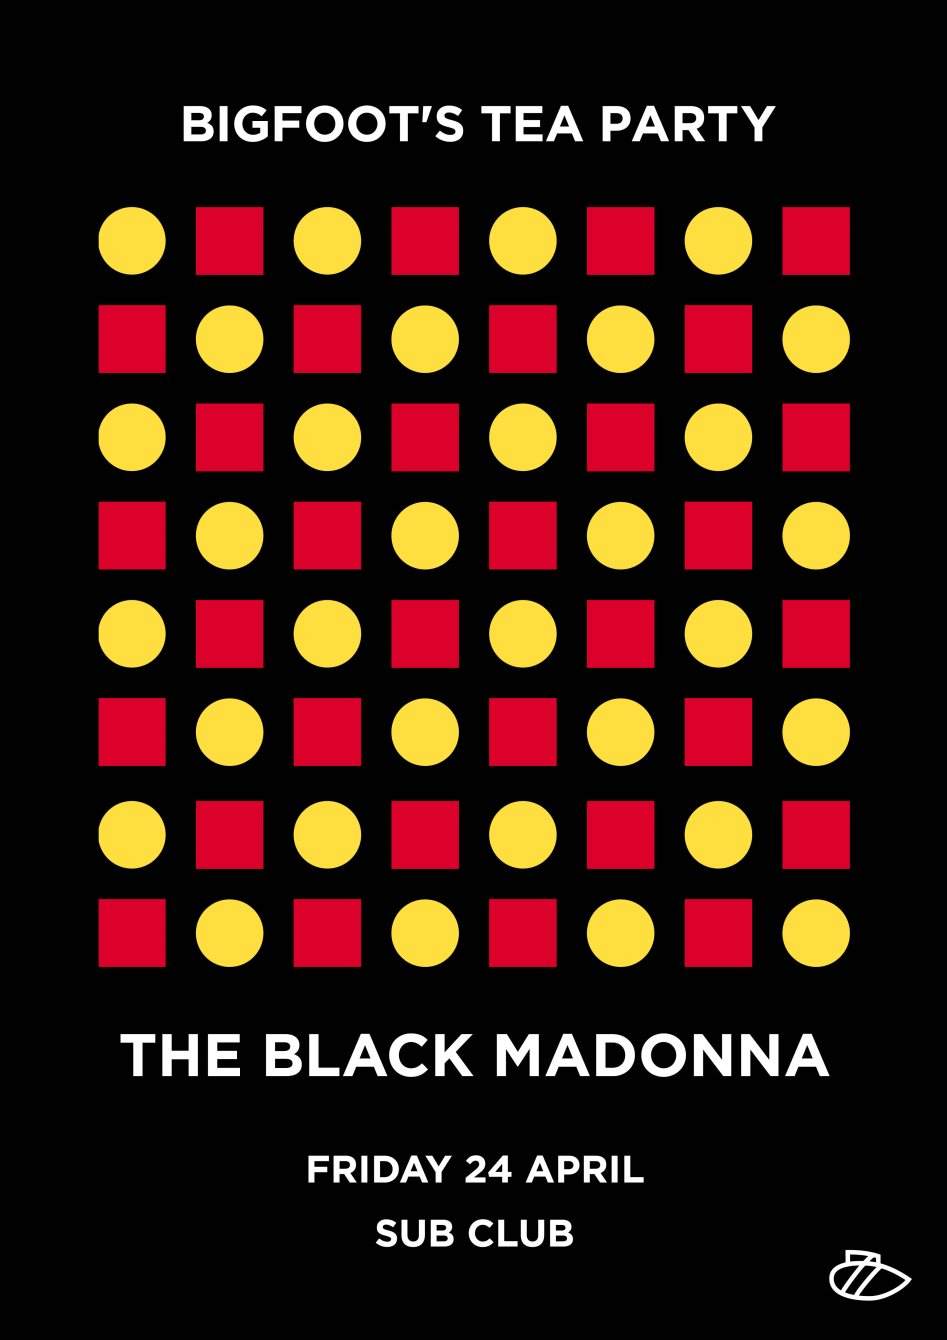 Bigfoot's Tea Party with The Black Madonna - フライヤー裏